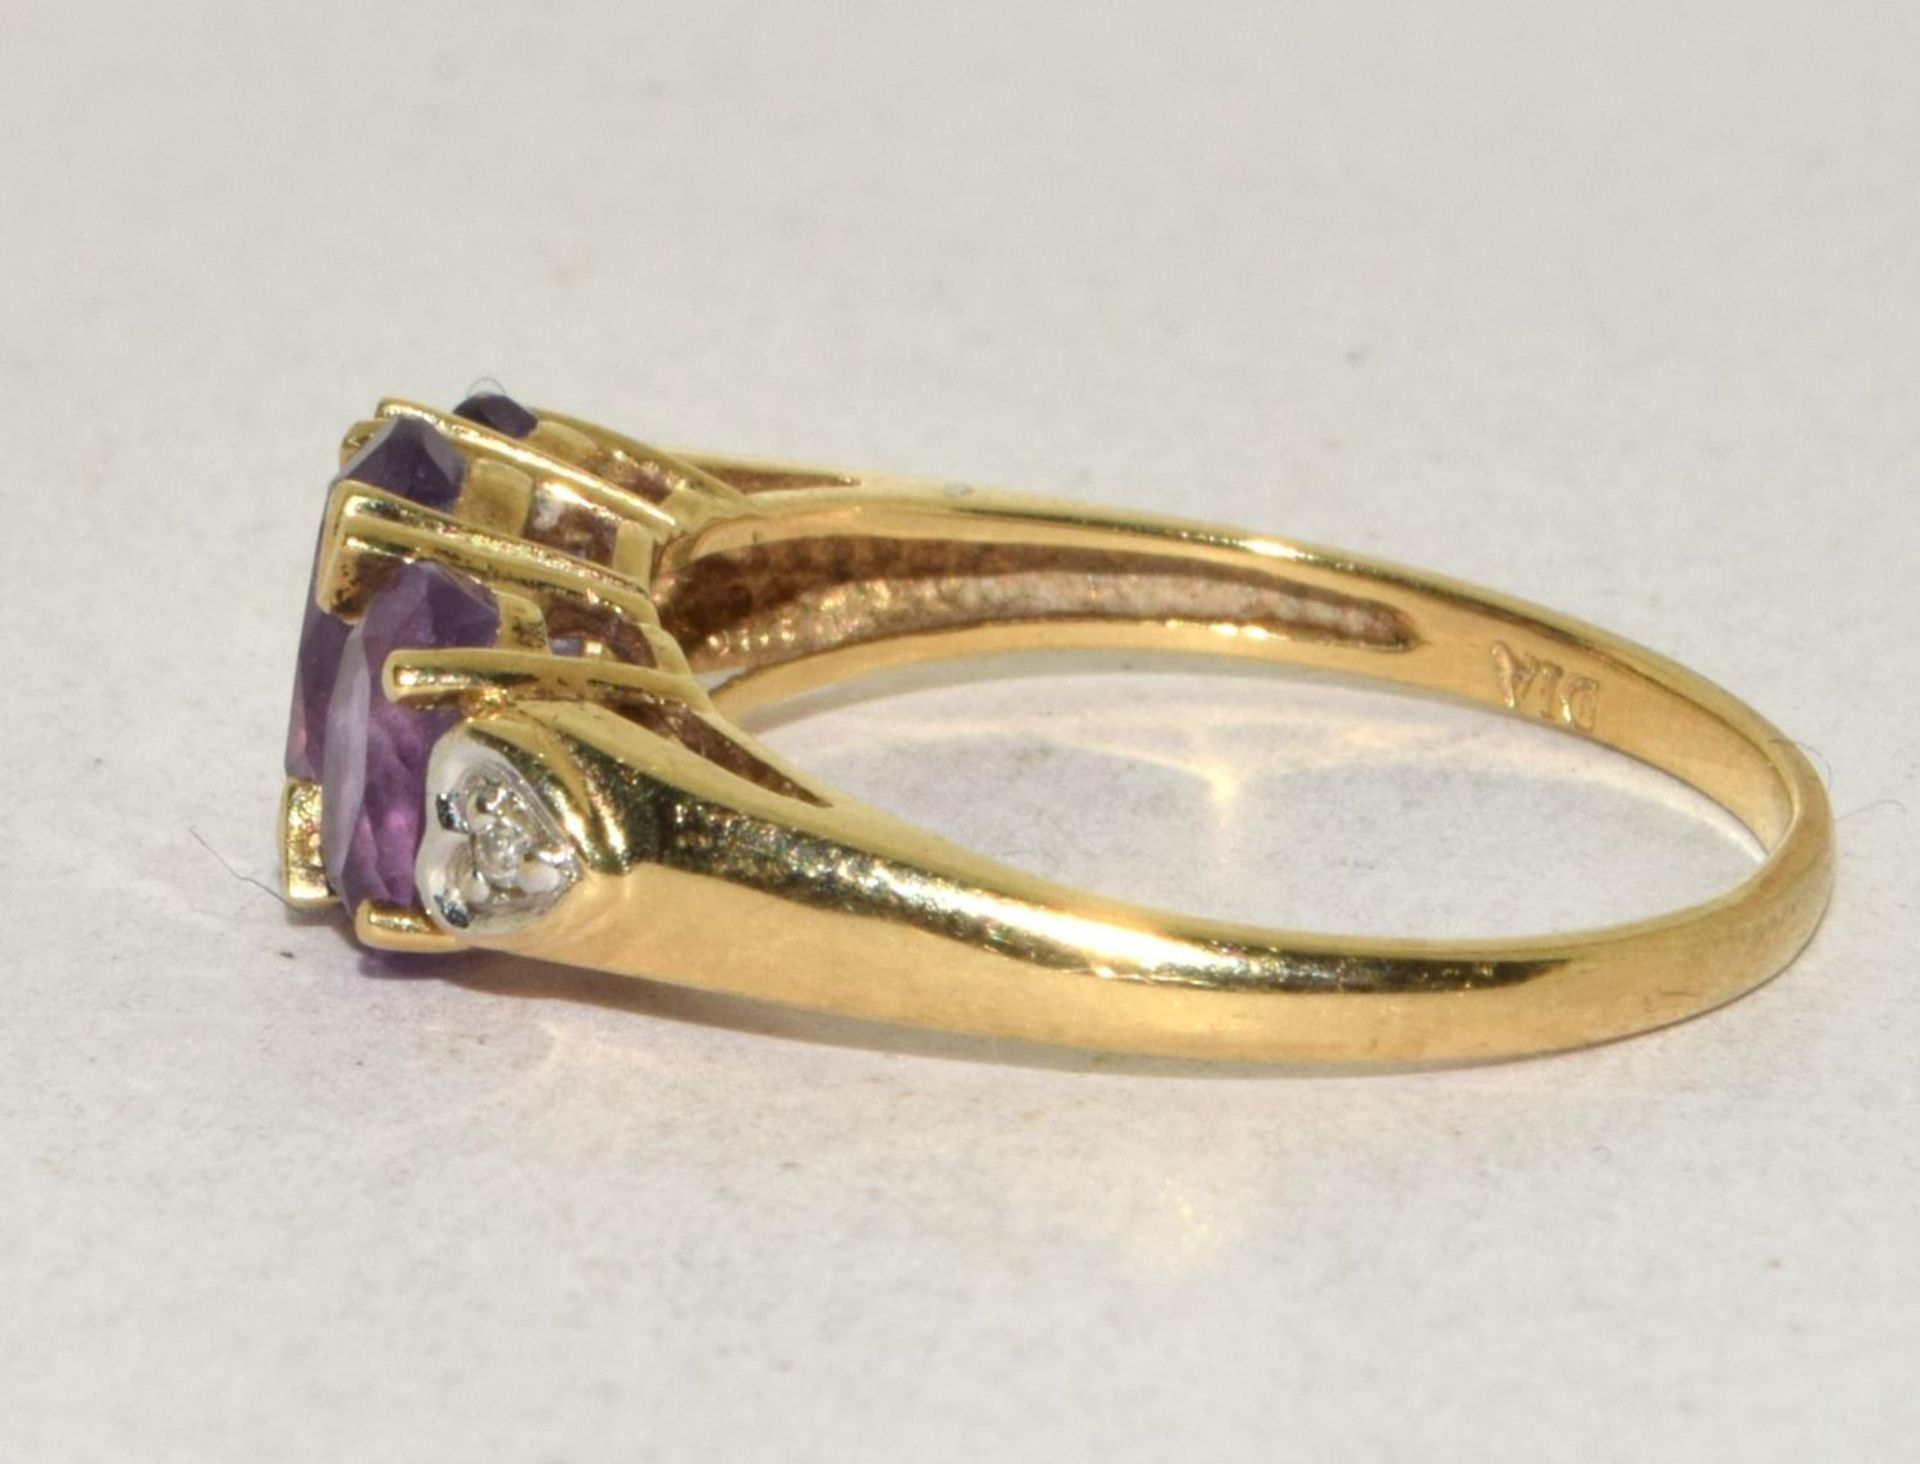 9ct gold ladies Diamond and Amethyst ring hallmarked as Diamond in the ring 2.2g size O - Image 2 of 5